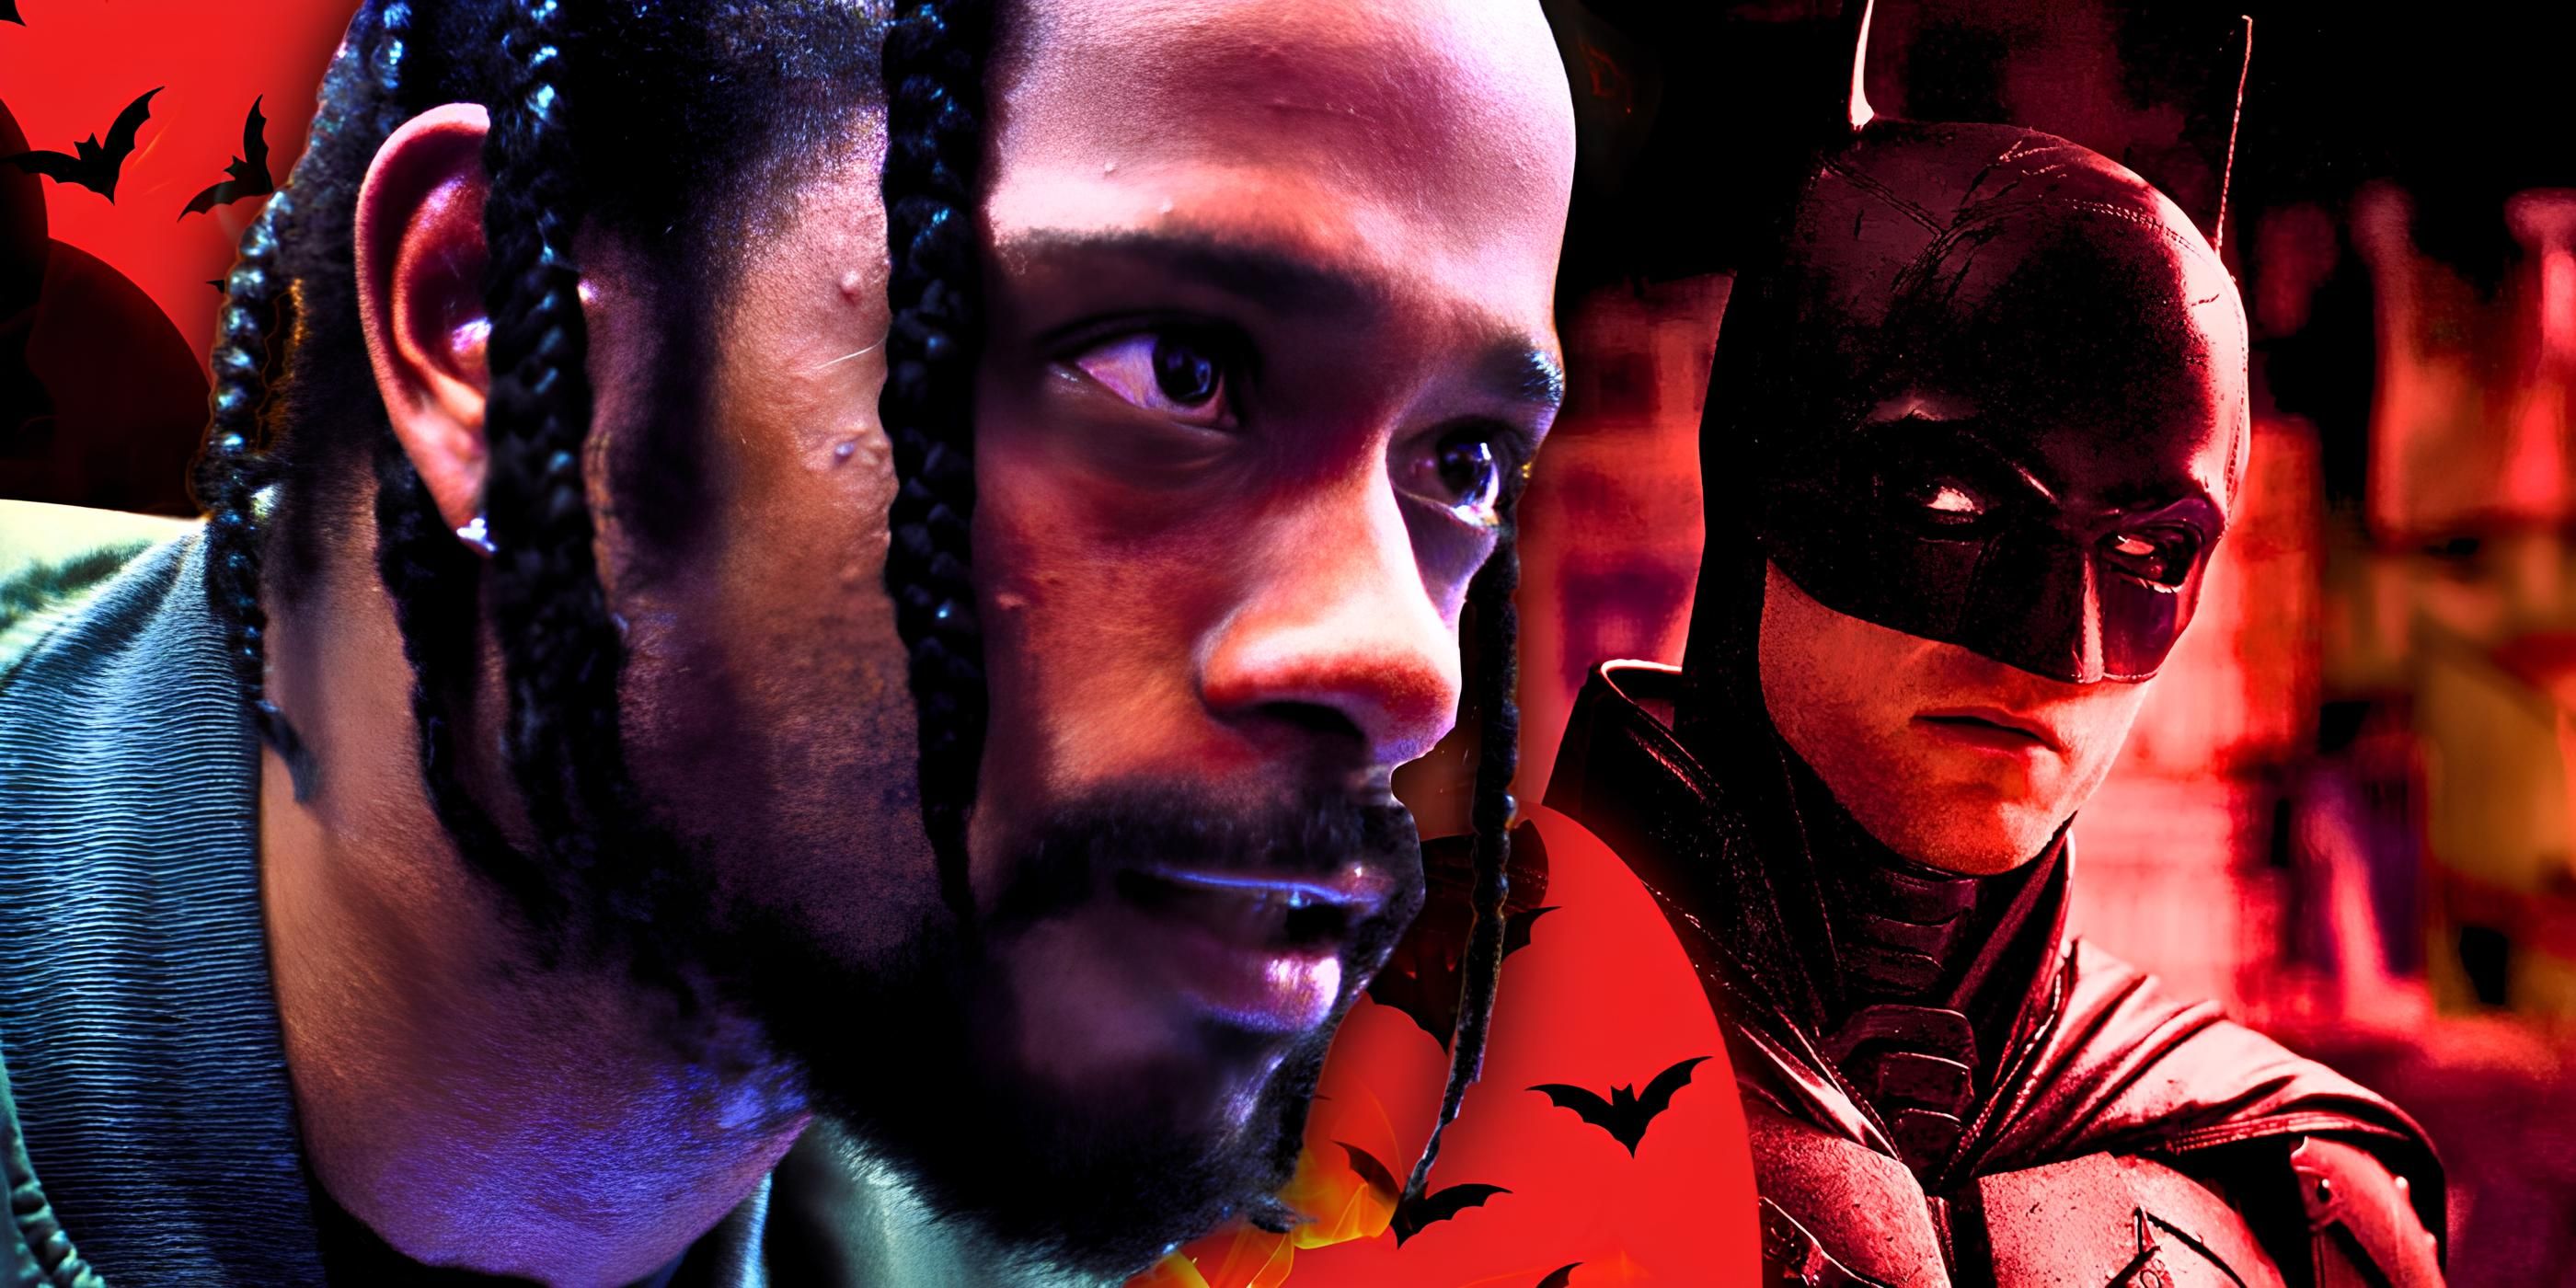 A split image of LaKeith Stanfield and Robert Pattinson's Batman